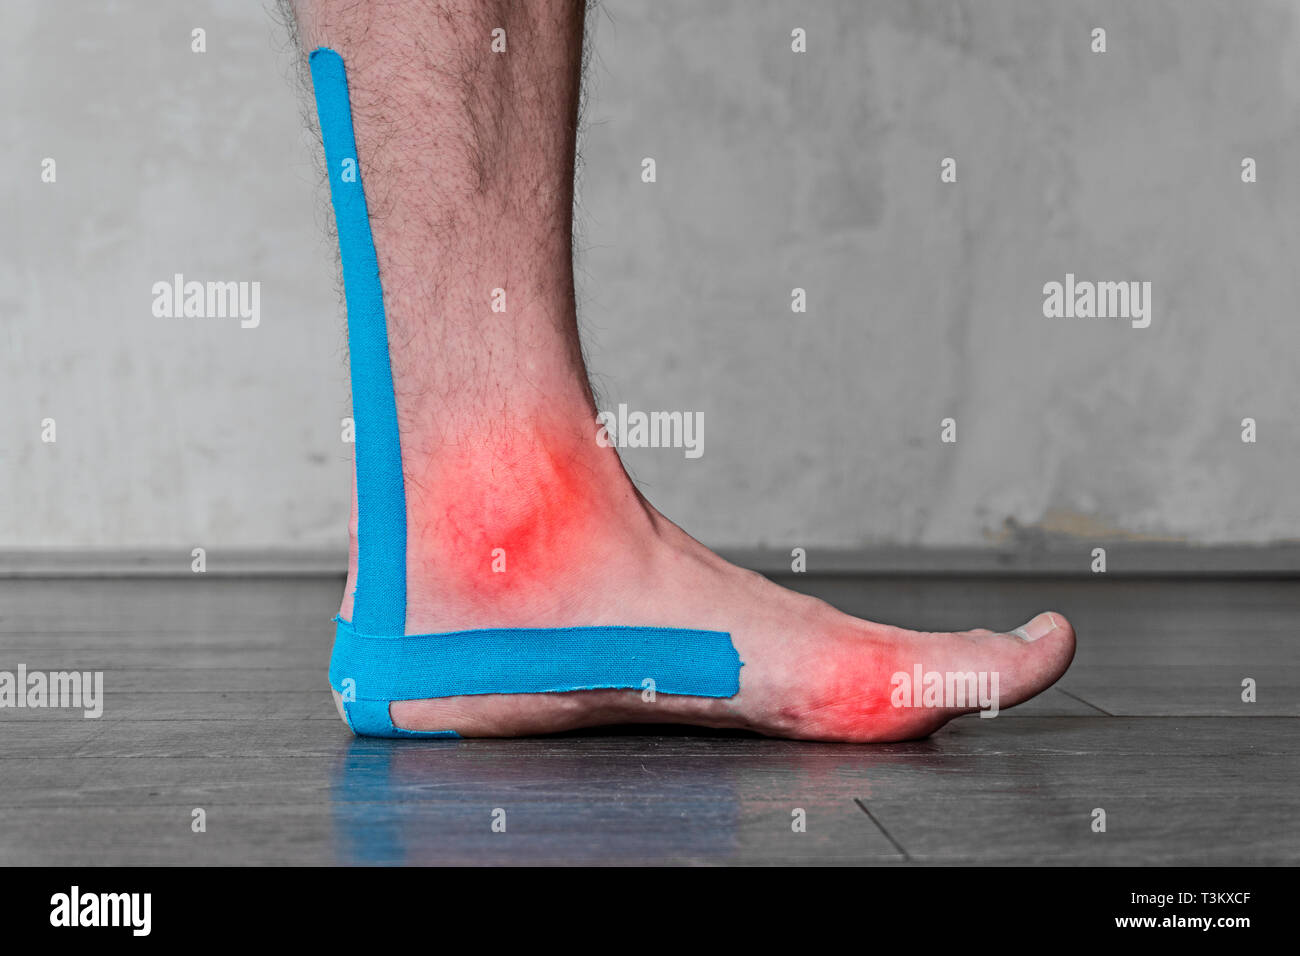 Male leg with ankle sprain, taped with specialized therapeutic cotton tape, sports injury, tendinitis, strain, fracture. Stock Photo